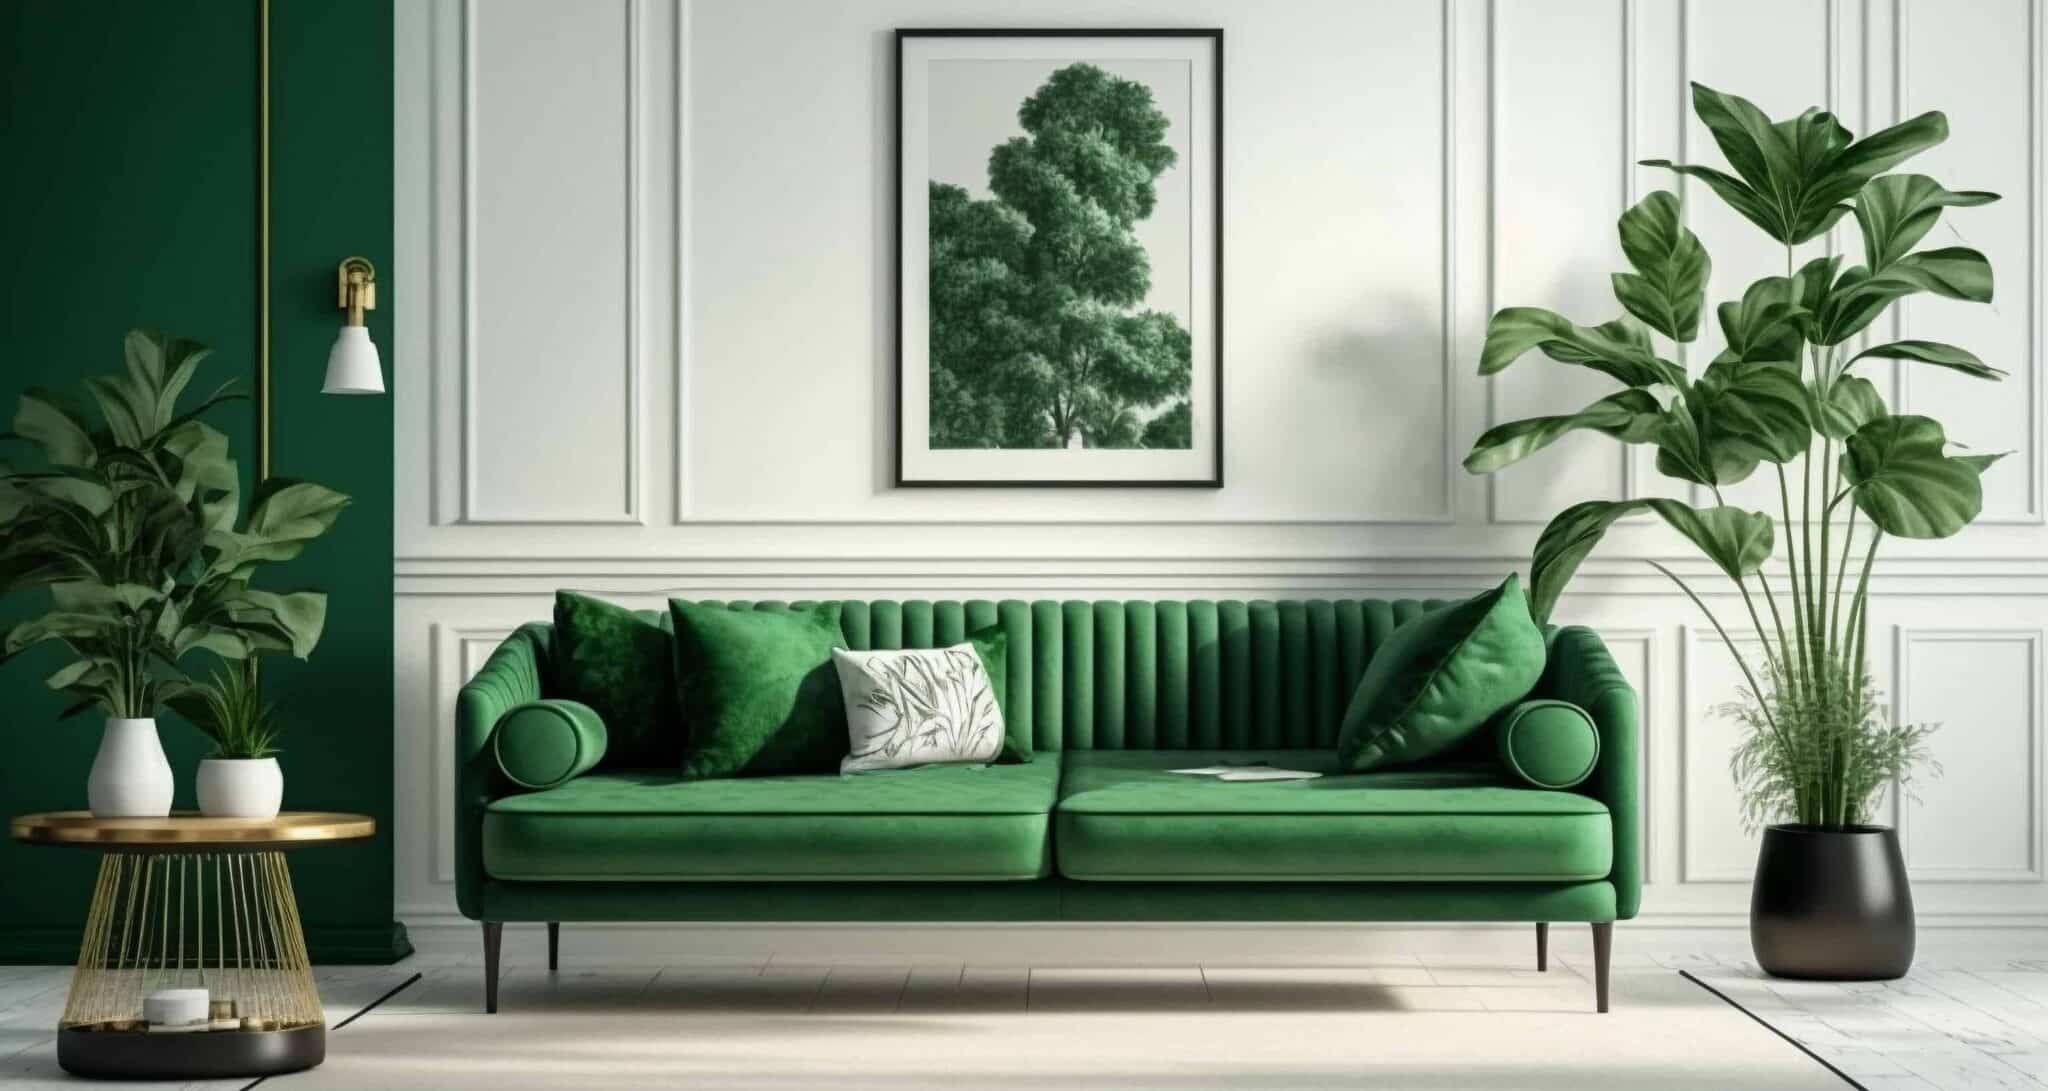 Soothing living room with green sofa, plants and white walls.